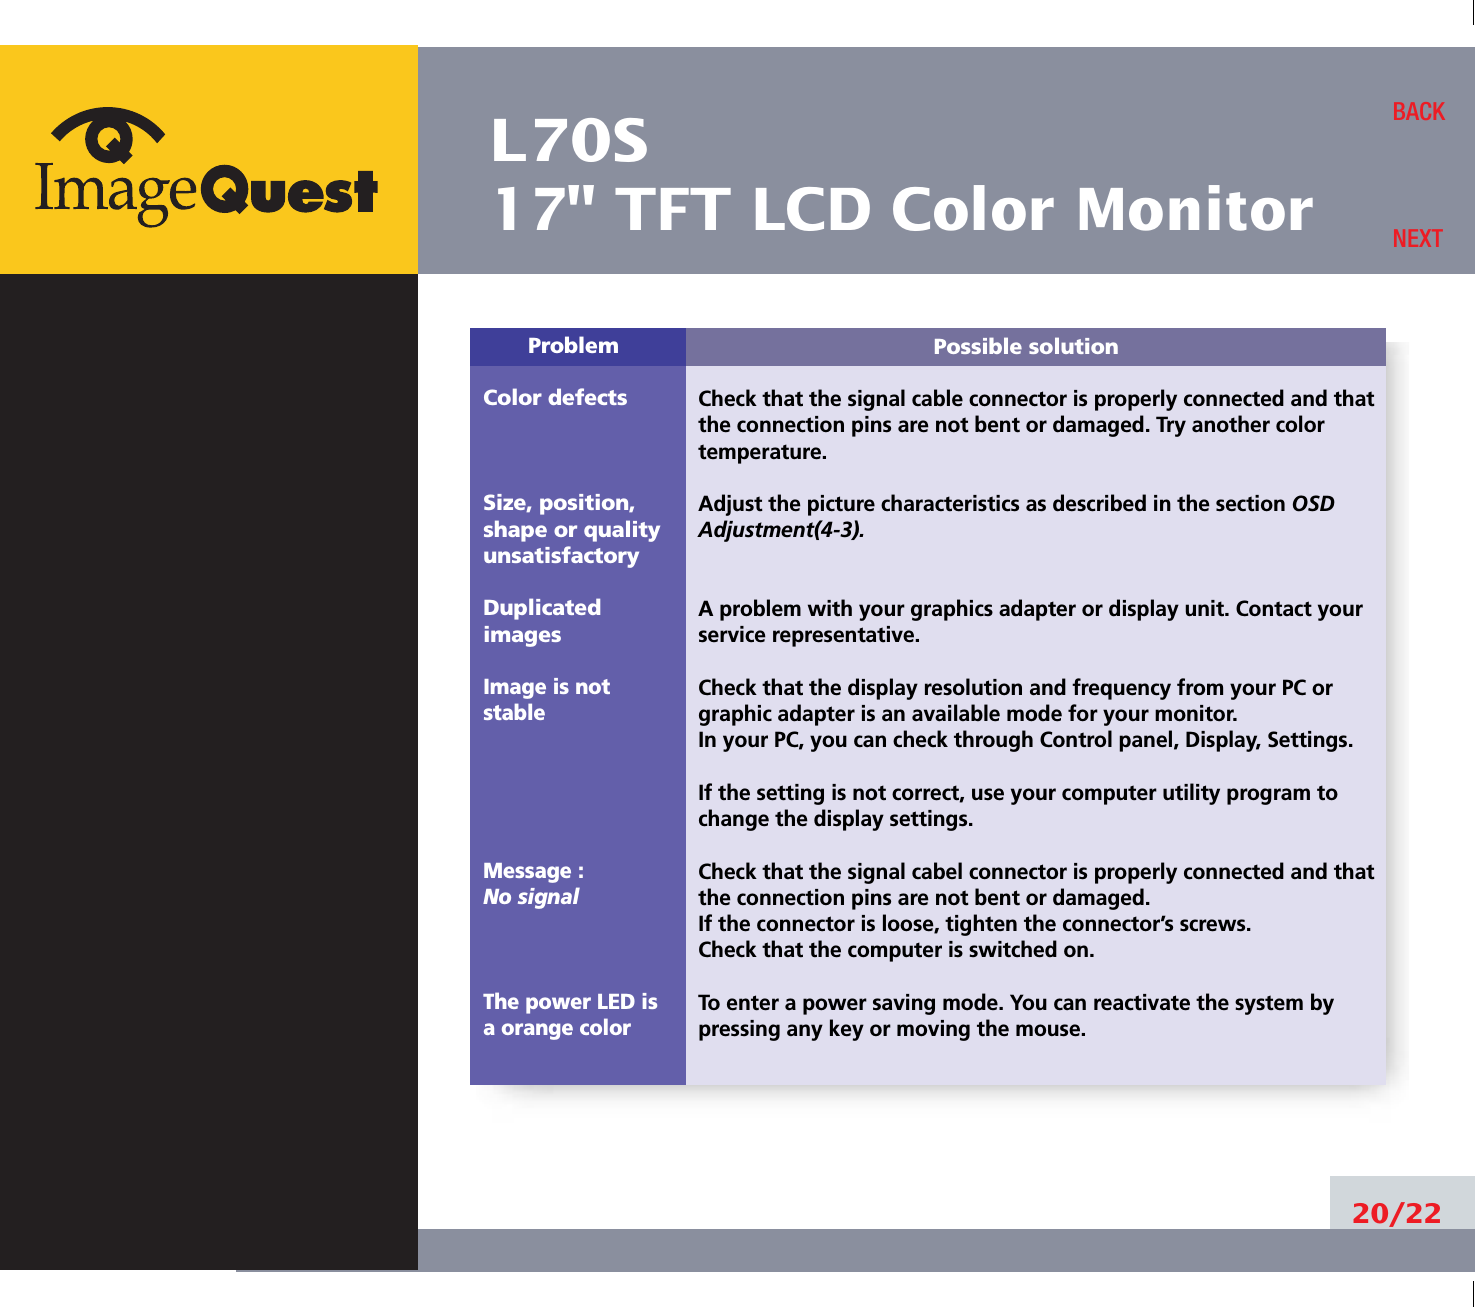 L70S17&quot; TFT LCD Color Monitor20/22BACKNEXTPossible solutionCheck that the signal cable connector is properly connected and thatthe connection pins are not bent or damaged. Try another colortemperature. Adjust the picture characteristics as described in the section OSDAdjustment(4-3).A problem with your graphics adapter or display unit. Contact yourservice representative.Check that the display resolution and frequency from your PC orgraphic adapter is an available mode for your monitor.In your PC, you can check through Control panel, Display, Settings.If the setting is not correct, use your computer utility program tochange the display settings.Check that the signal cabel connector is properly connected and thatthe connection pins are not bent or damaged.If the connector is loose, tighten the connector’s screws.Check that the computer is switched on.To enter a power saving mode. You can reactivate the system bypressing any key or moving the mouse.ProblemColor defectsSize, position,shape or qualityunsatisfactoryDuplicatedimagesImage is notstableMessage : No signalThe power LED isa orange color